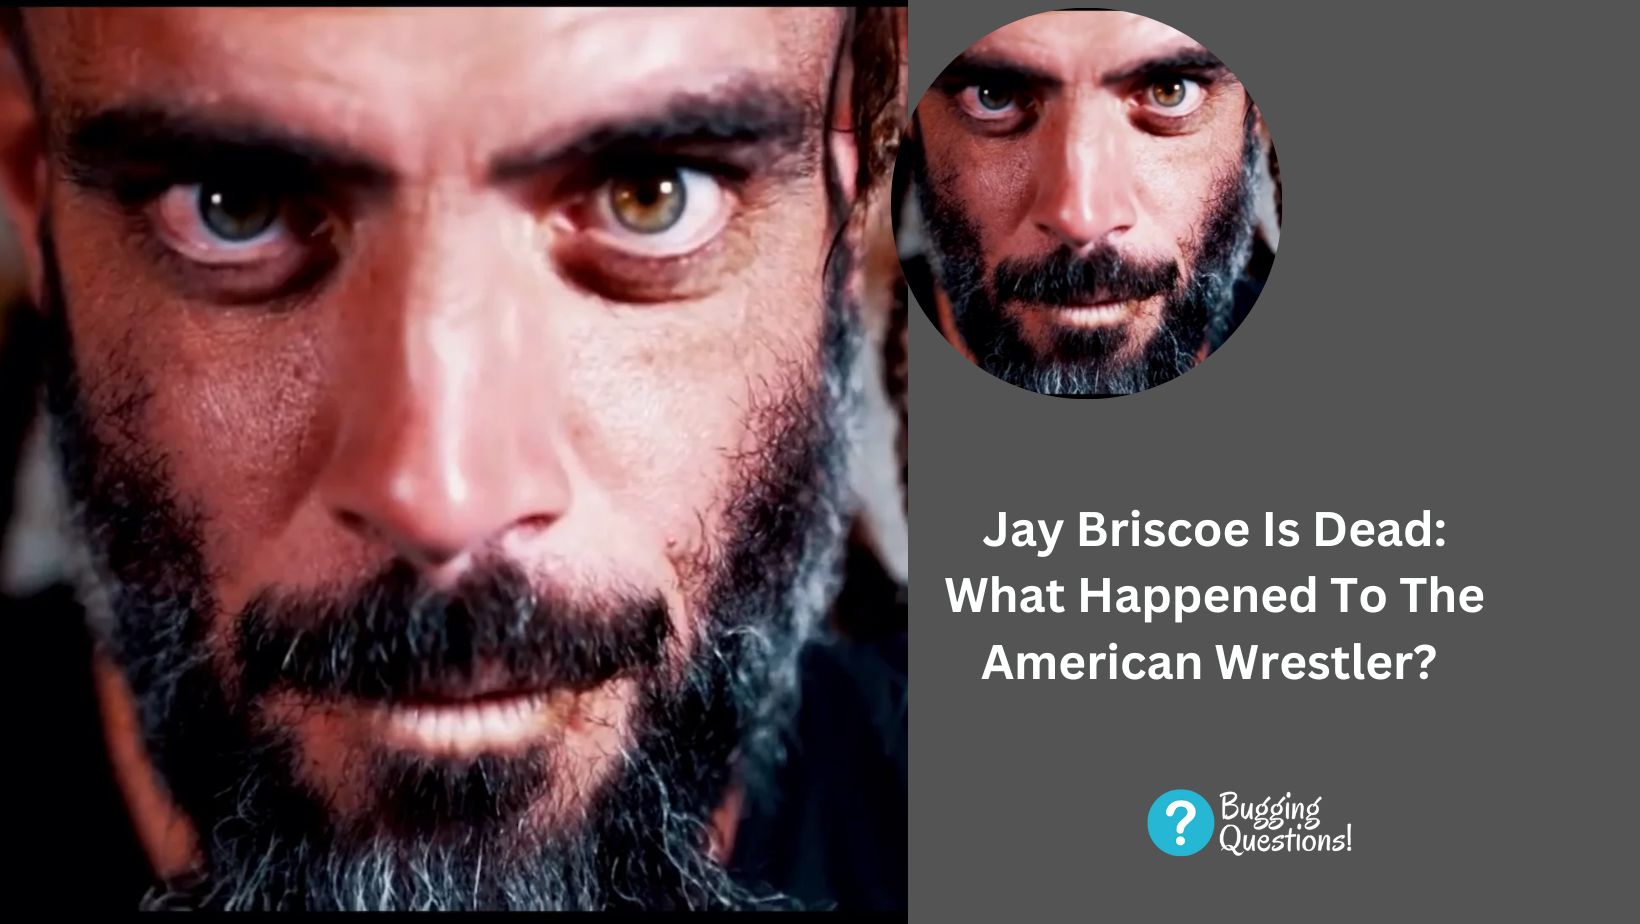 Jay Briscoe Is Dead: What Happened To The American Wrestler?